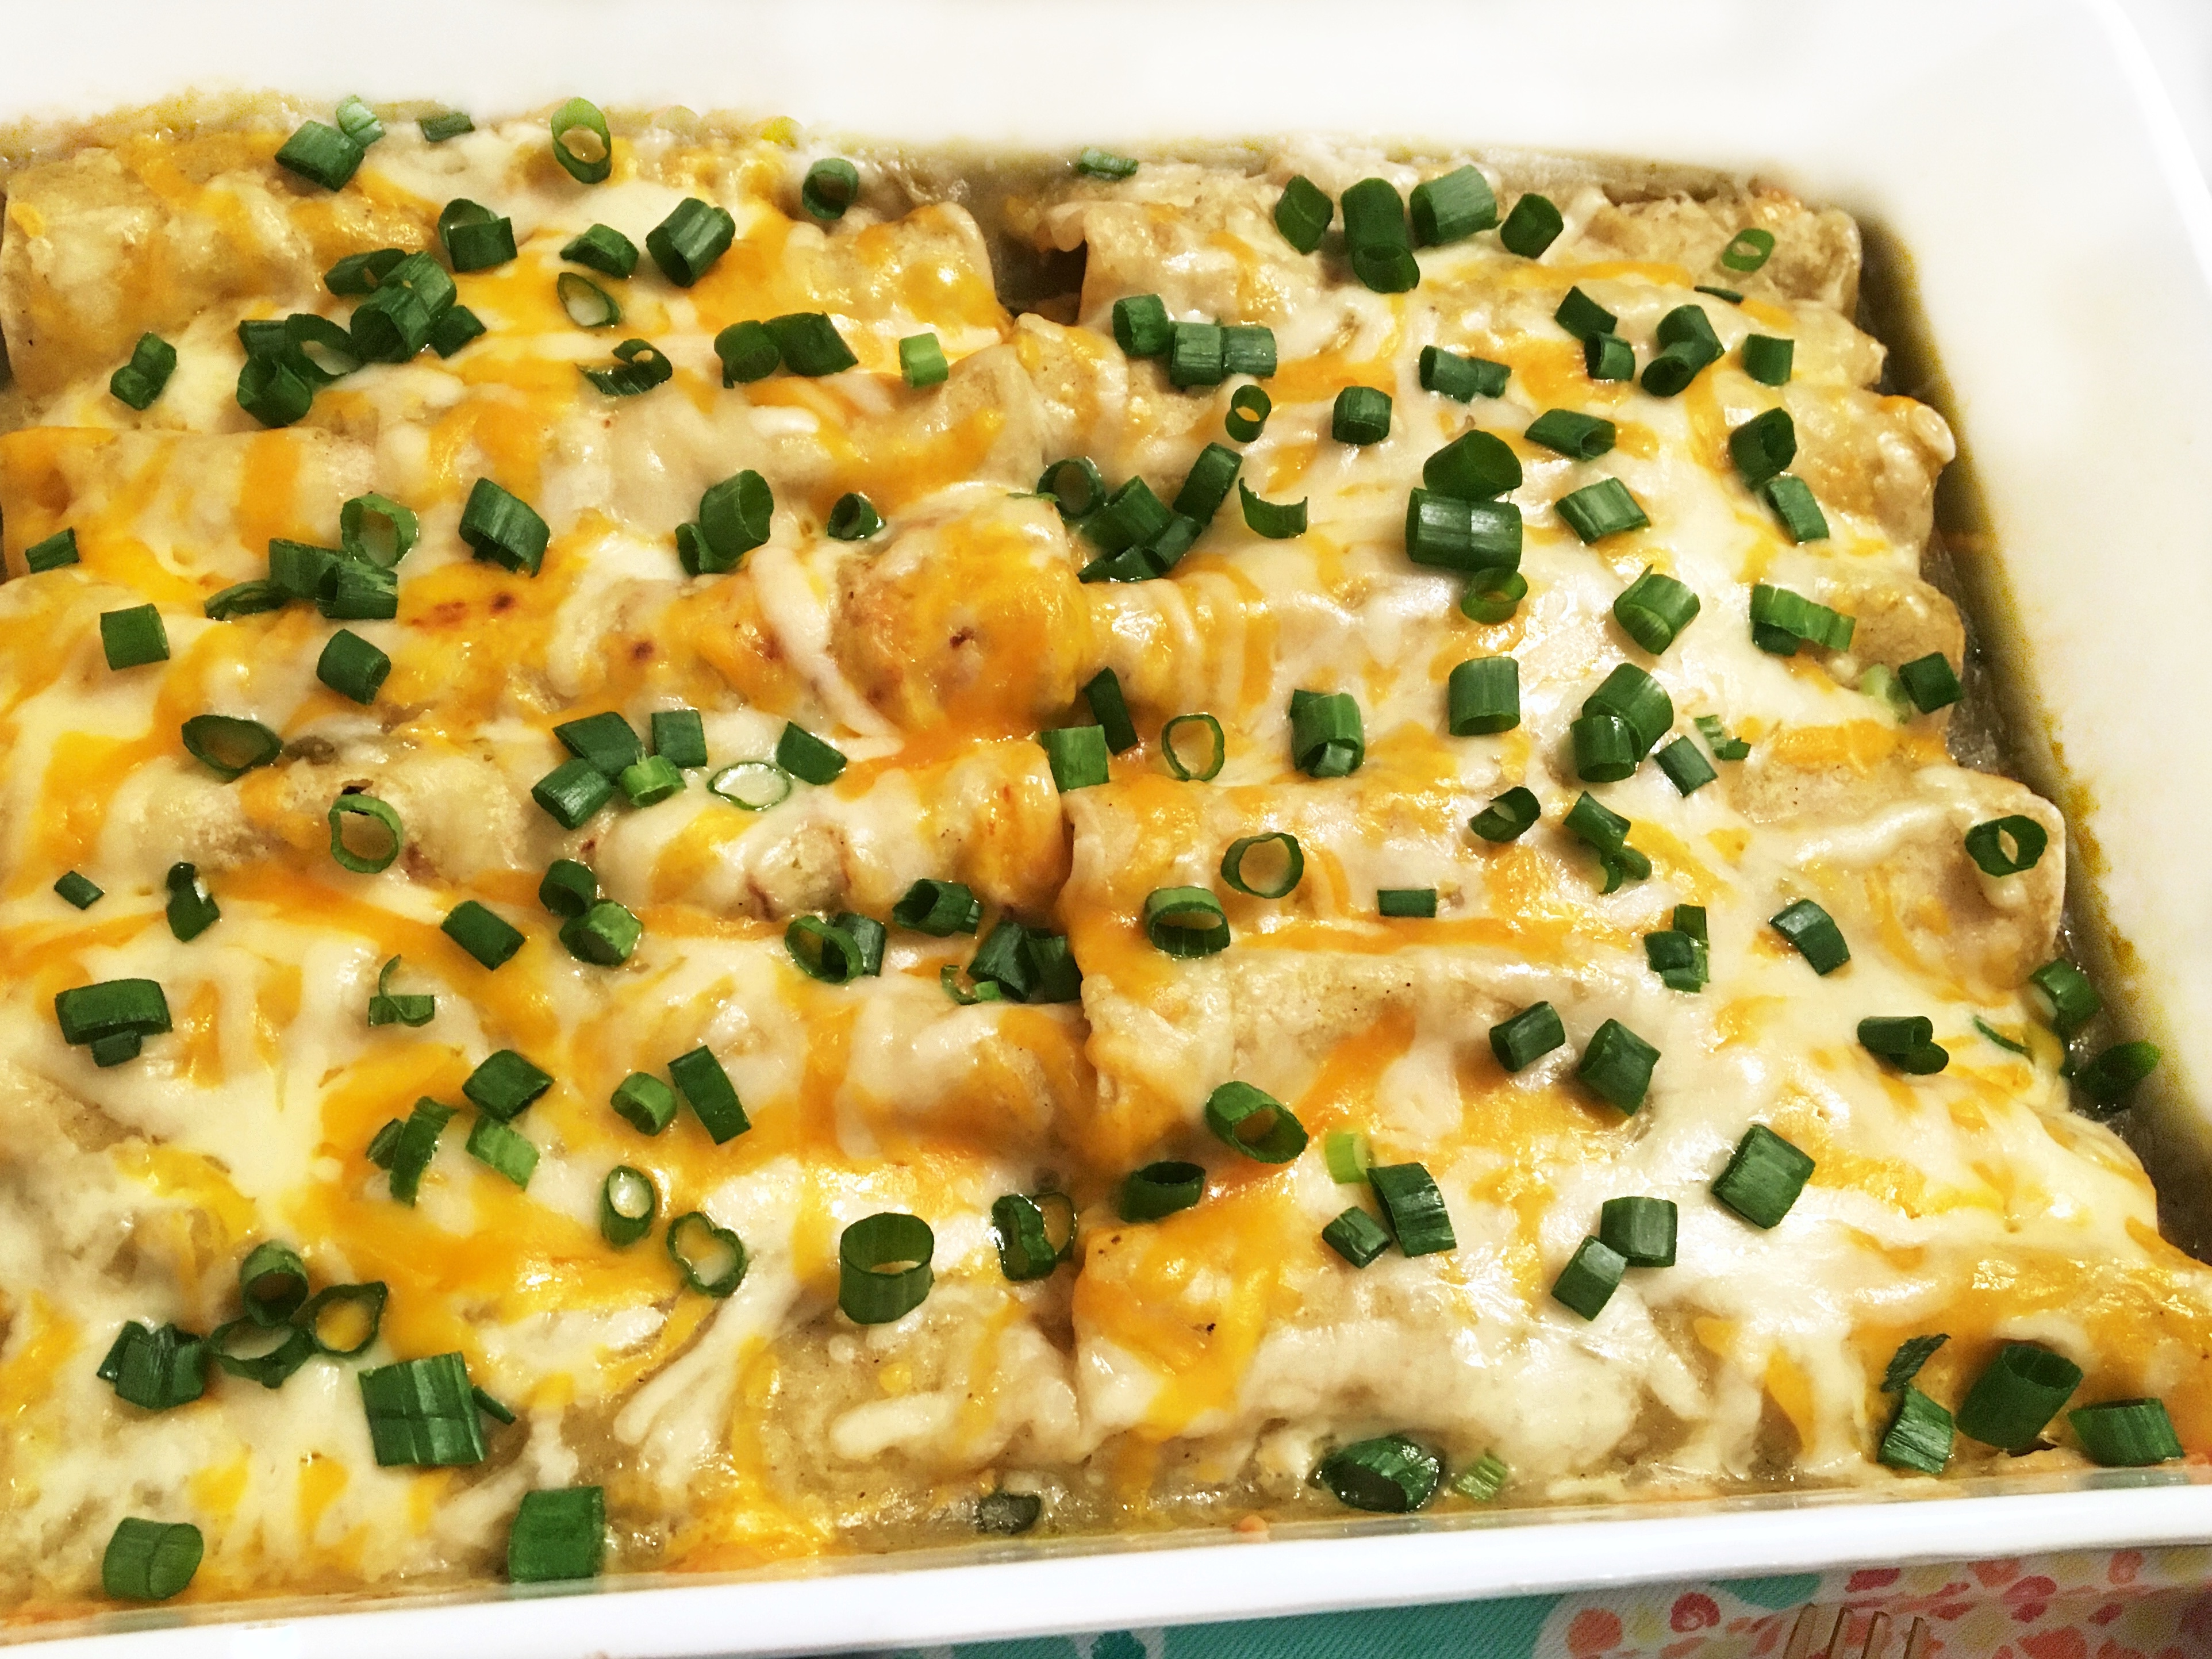 Try our cheesy Green Chile Chicken enchiladas with a flavorful green sauce